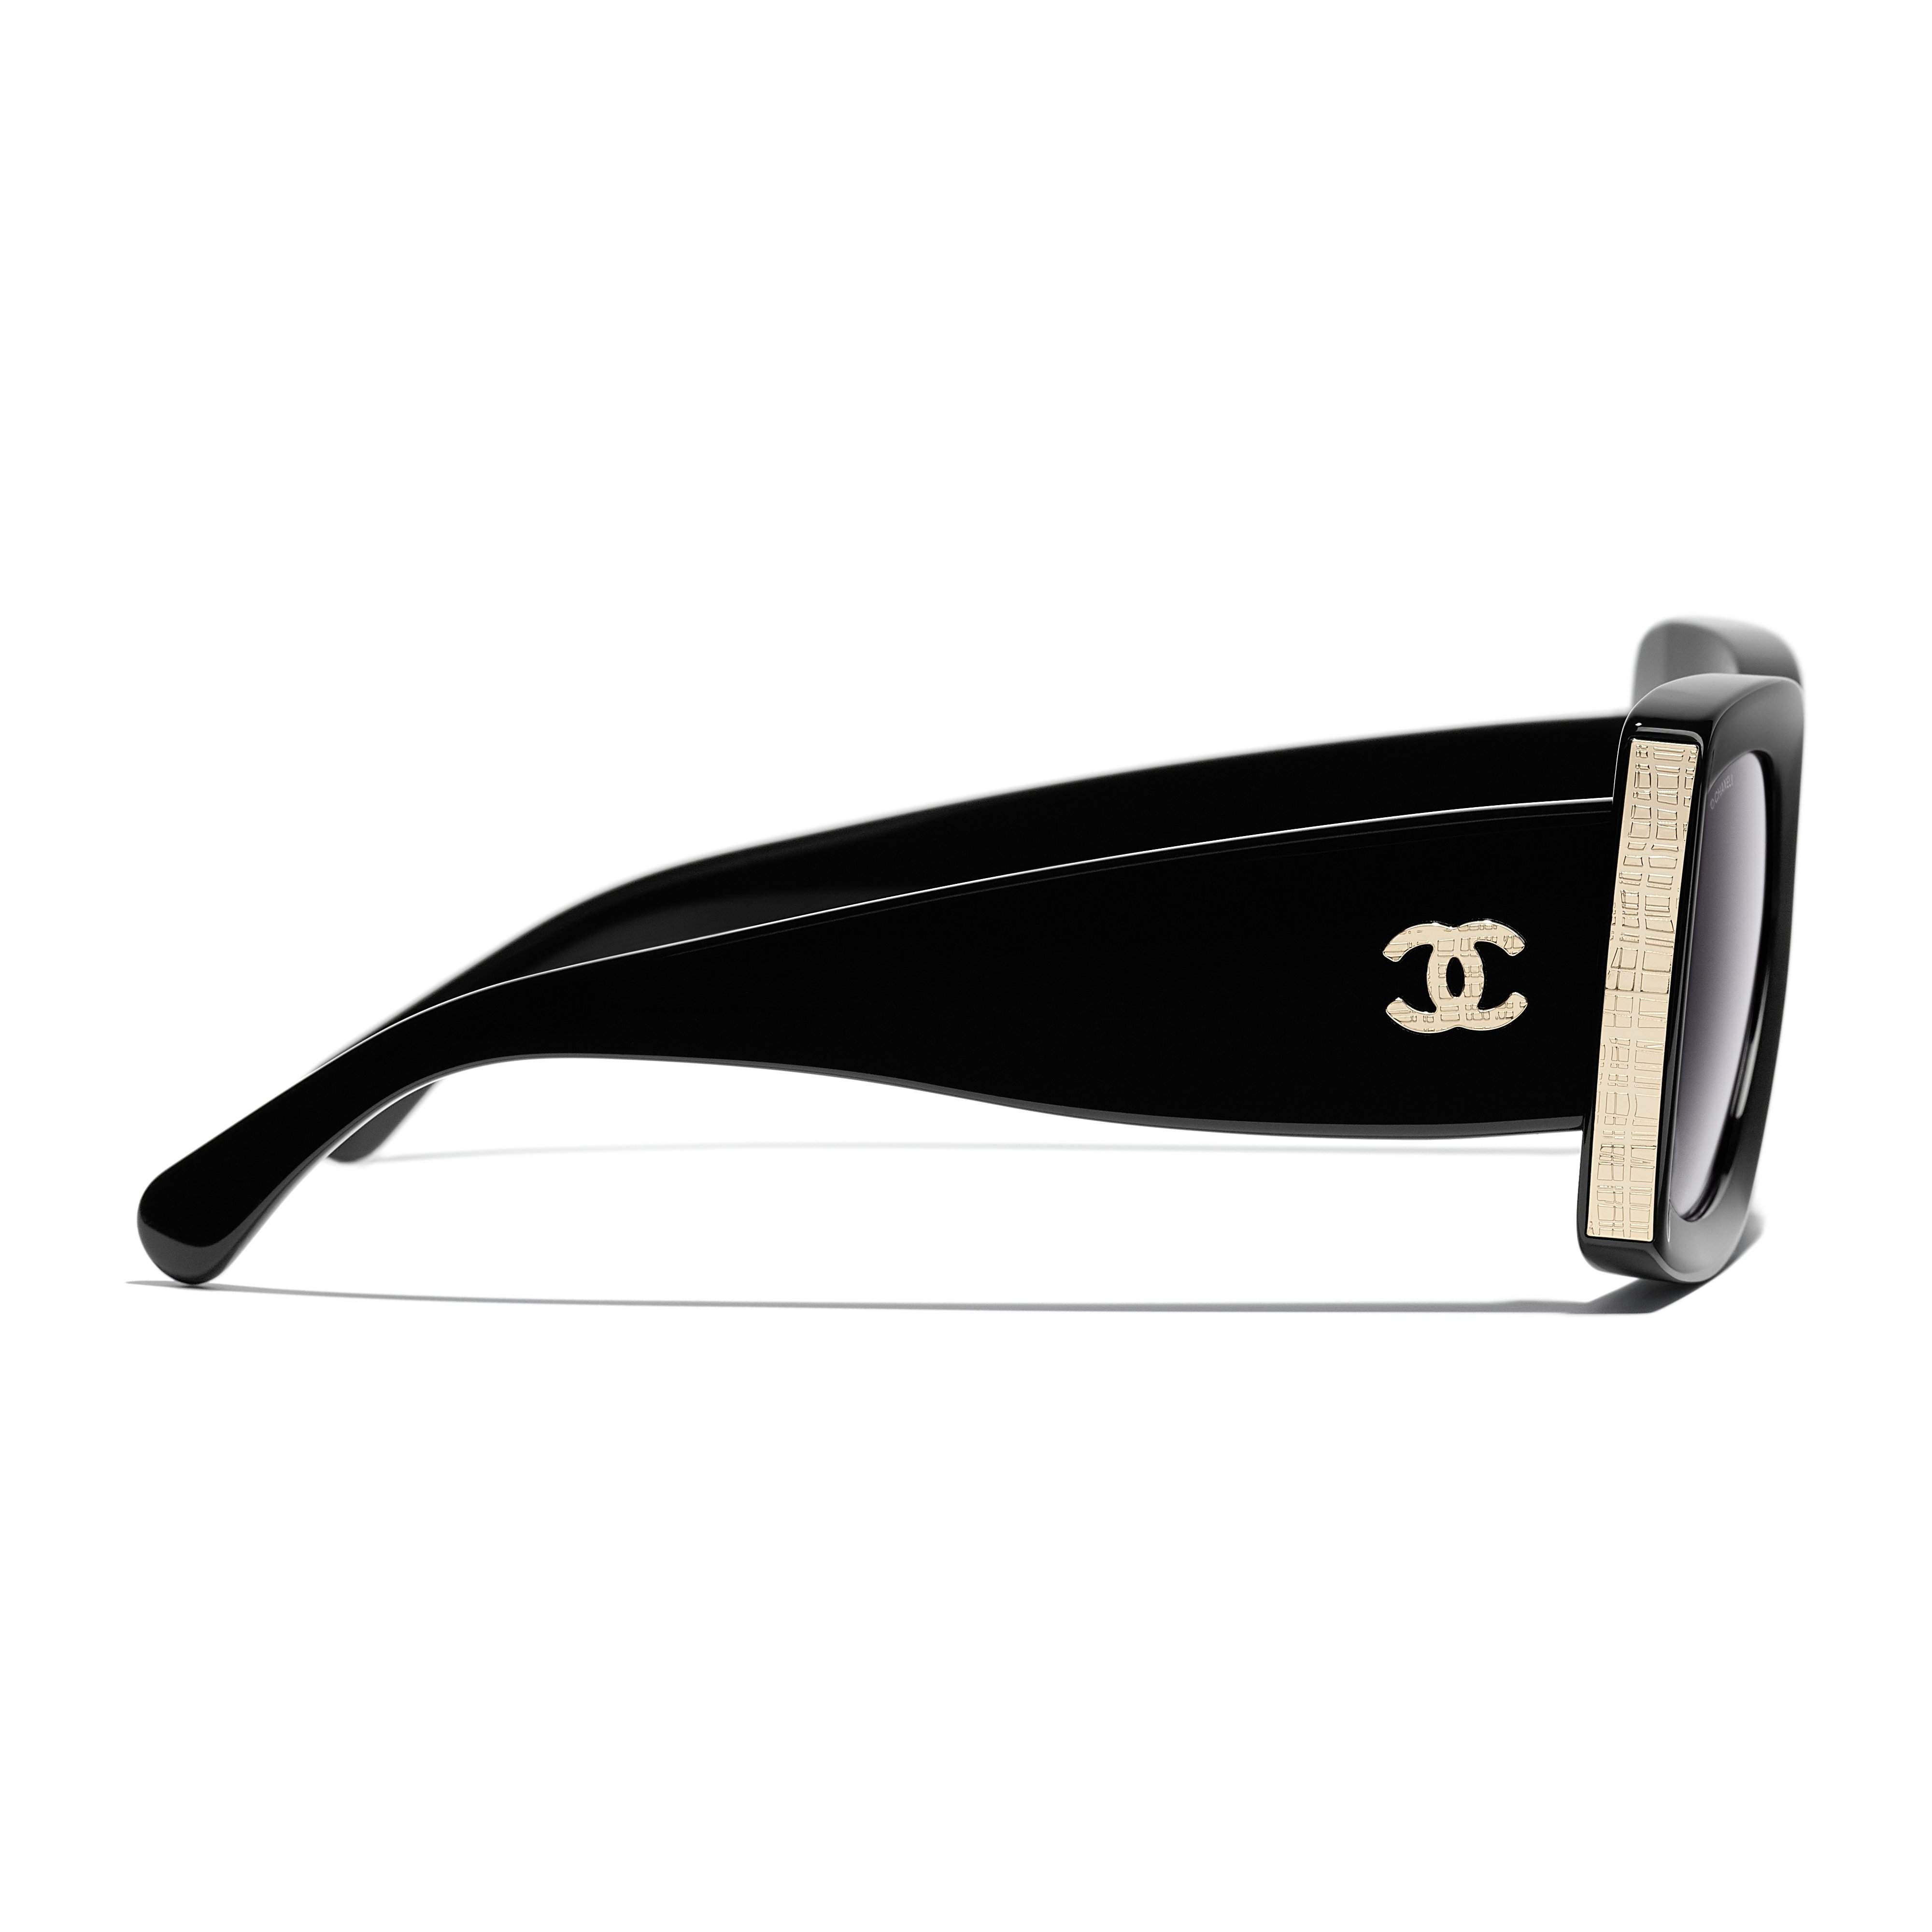 CHANEL, Accessories, Chanel 5458a C622t8 55 7 140 3p Butterfly Sunglasses